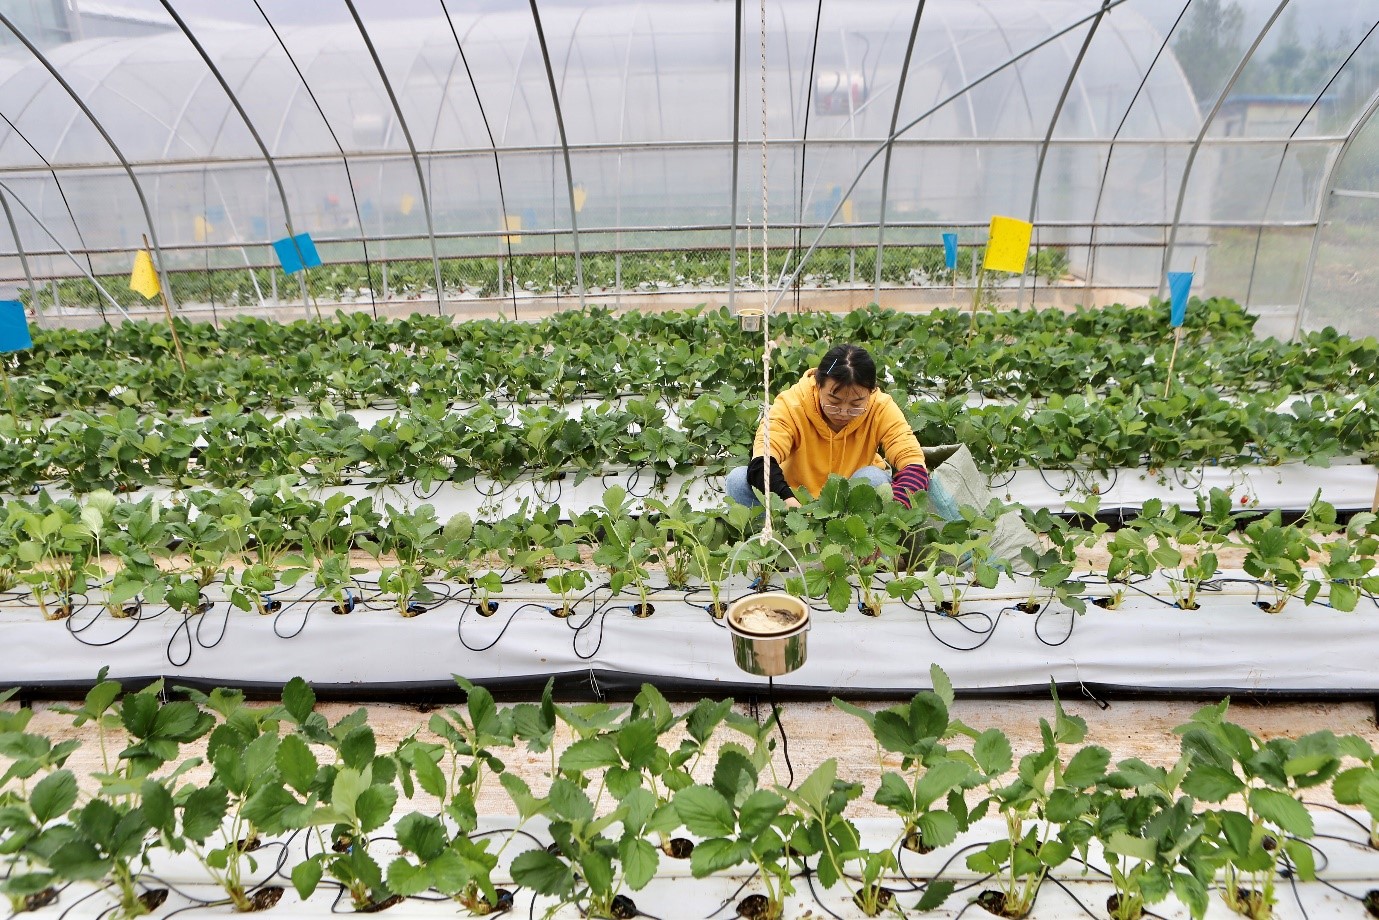 A member of the traditional farming teams tending to the strawberry beds at the Smart Agriculture Competition. (Source: Pinduoduo)